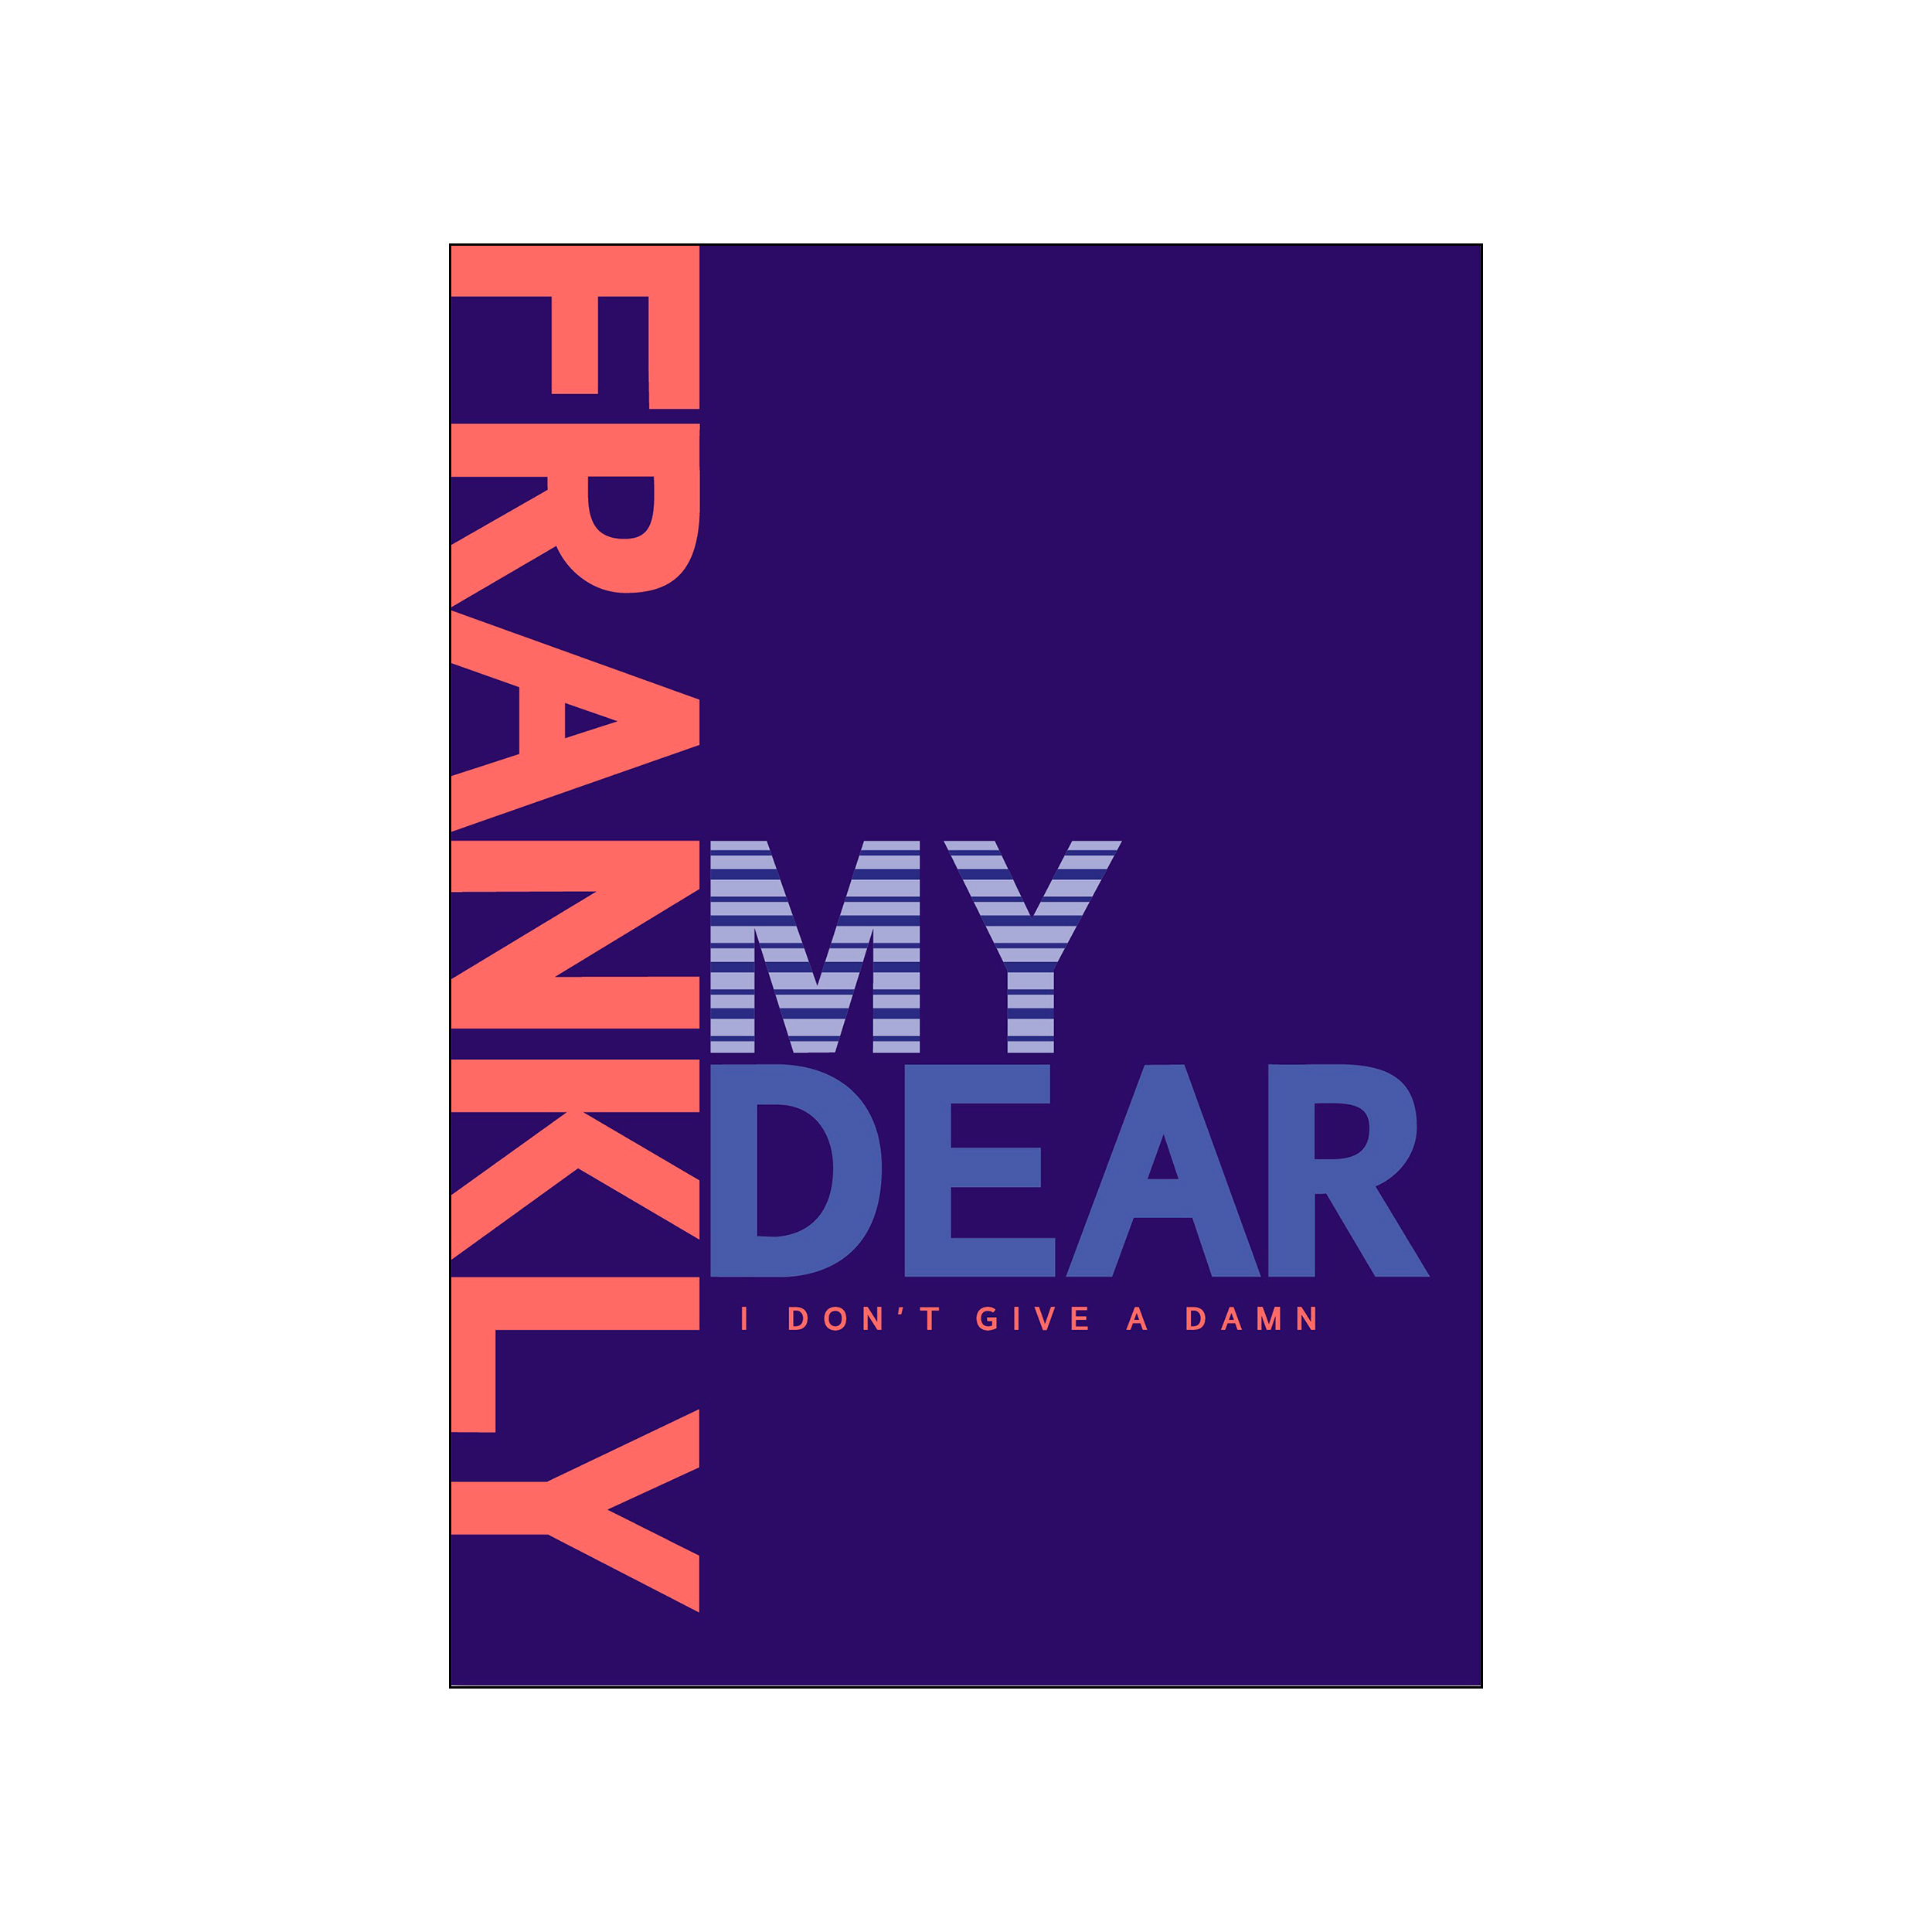 PLTY Frankly My Dear Poster - A3